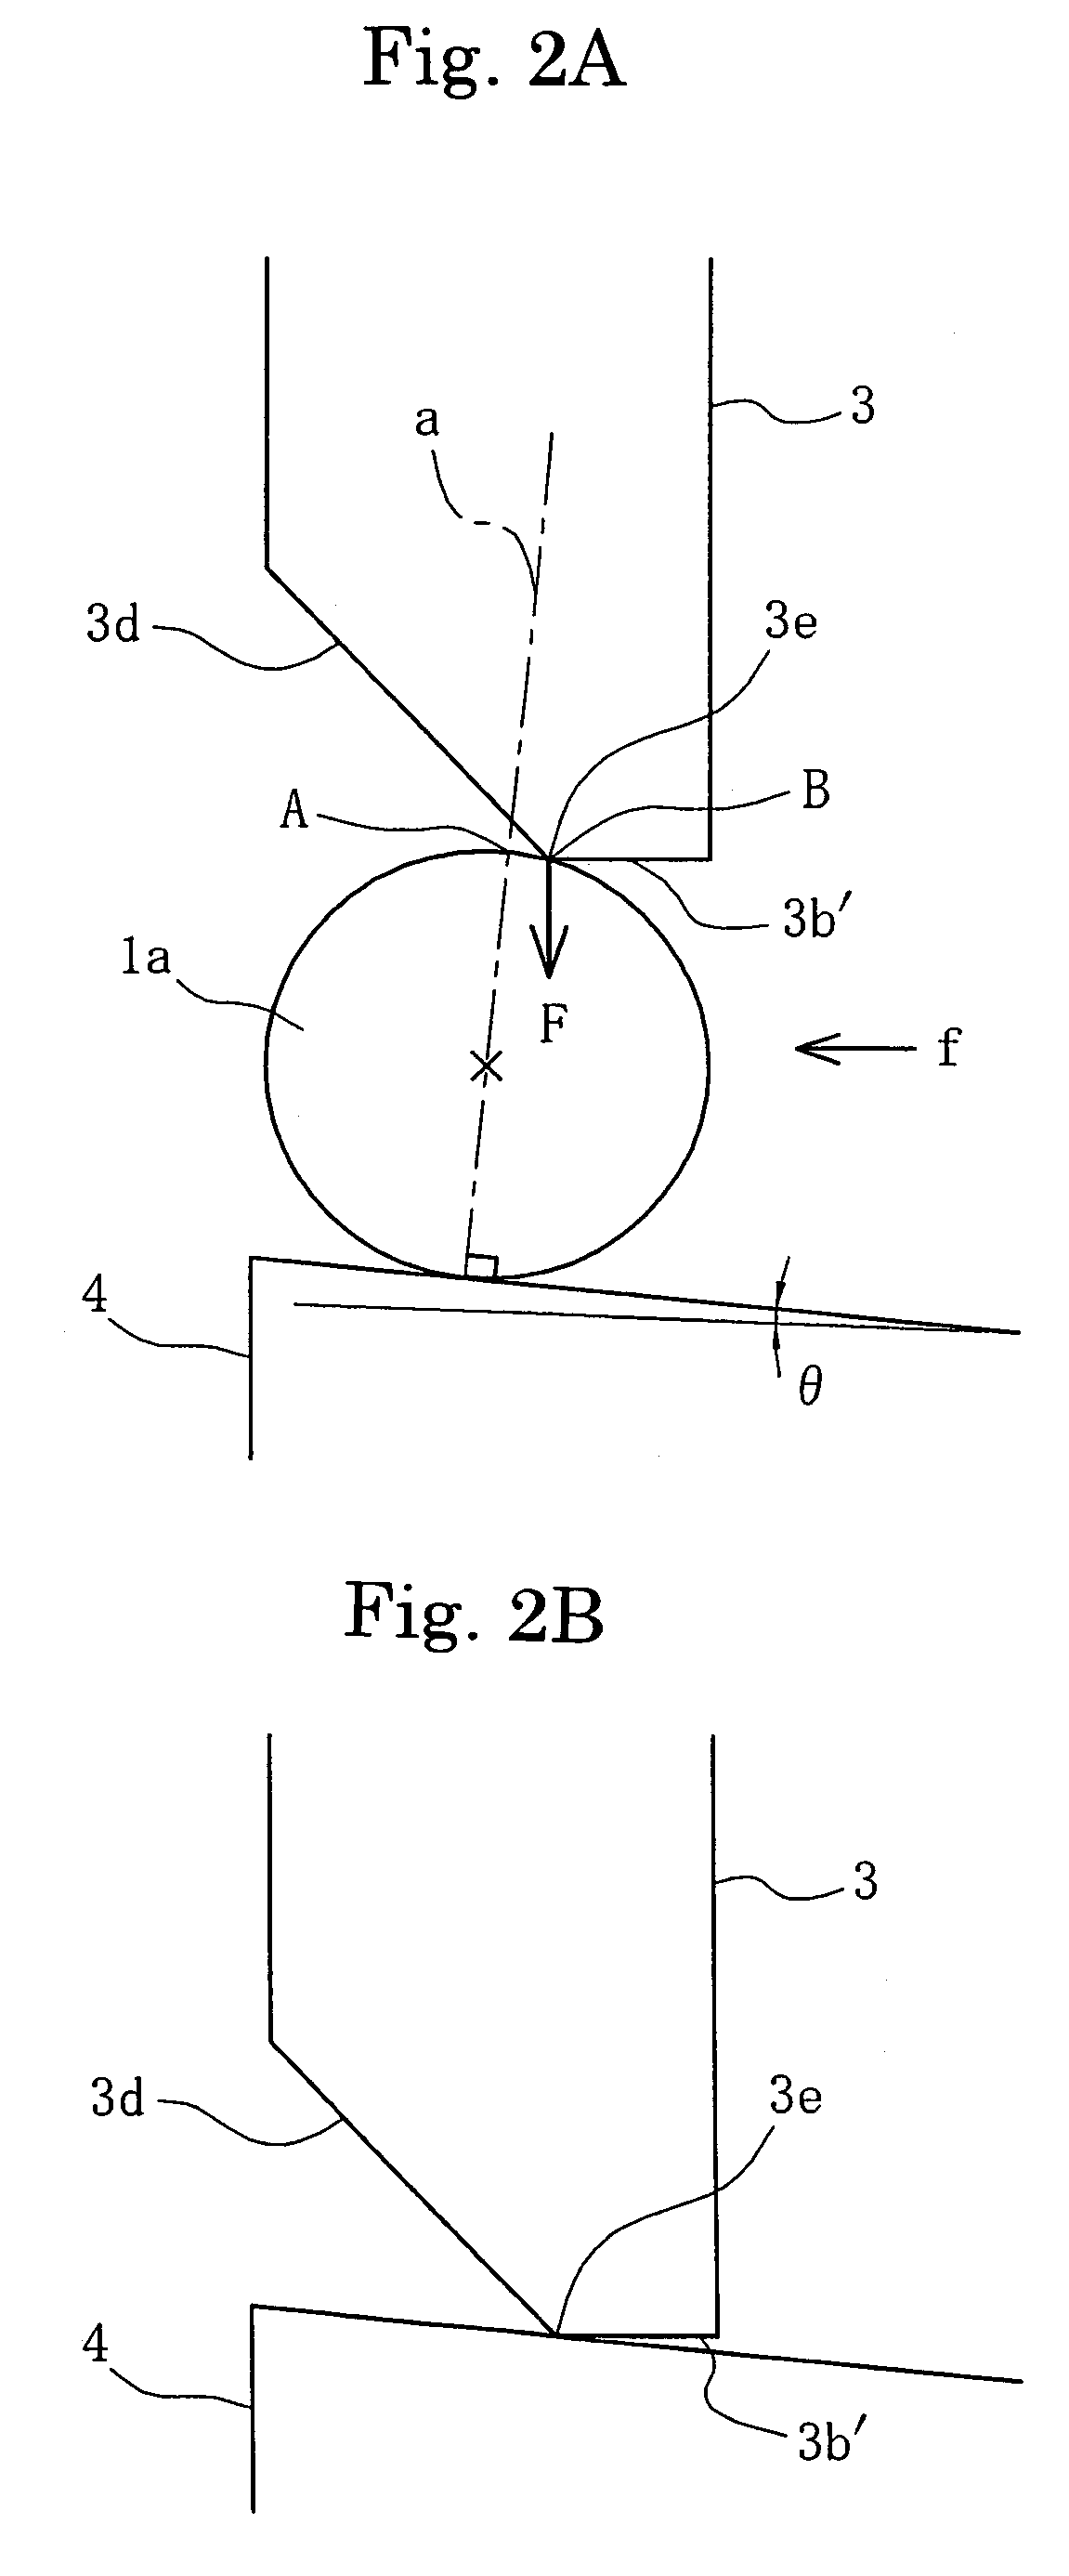 Surgical stapler with sound producing mechanism to signal the completion of the stapling process